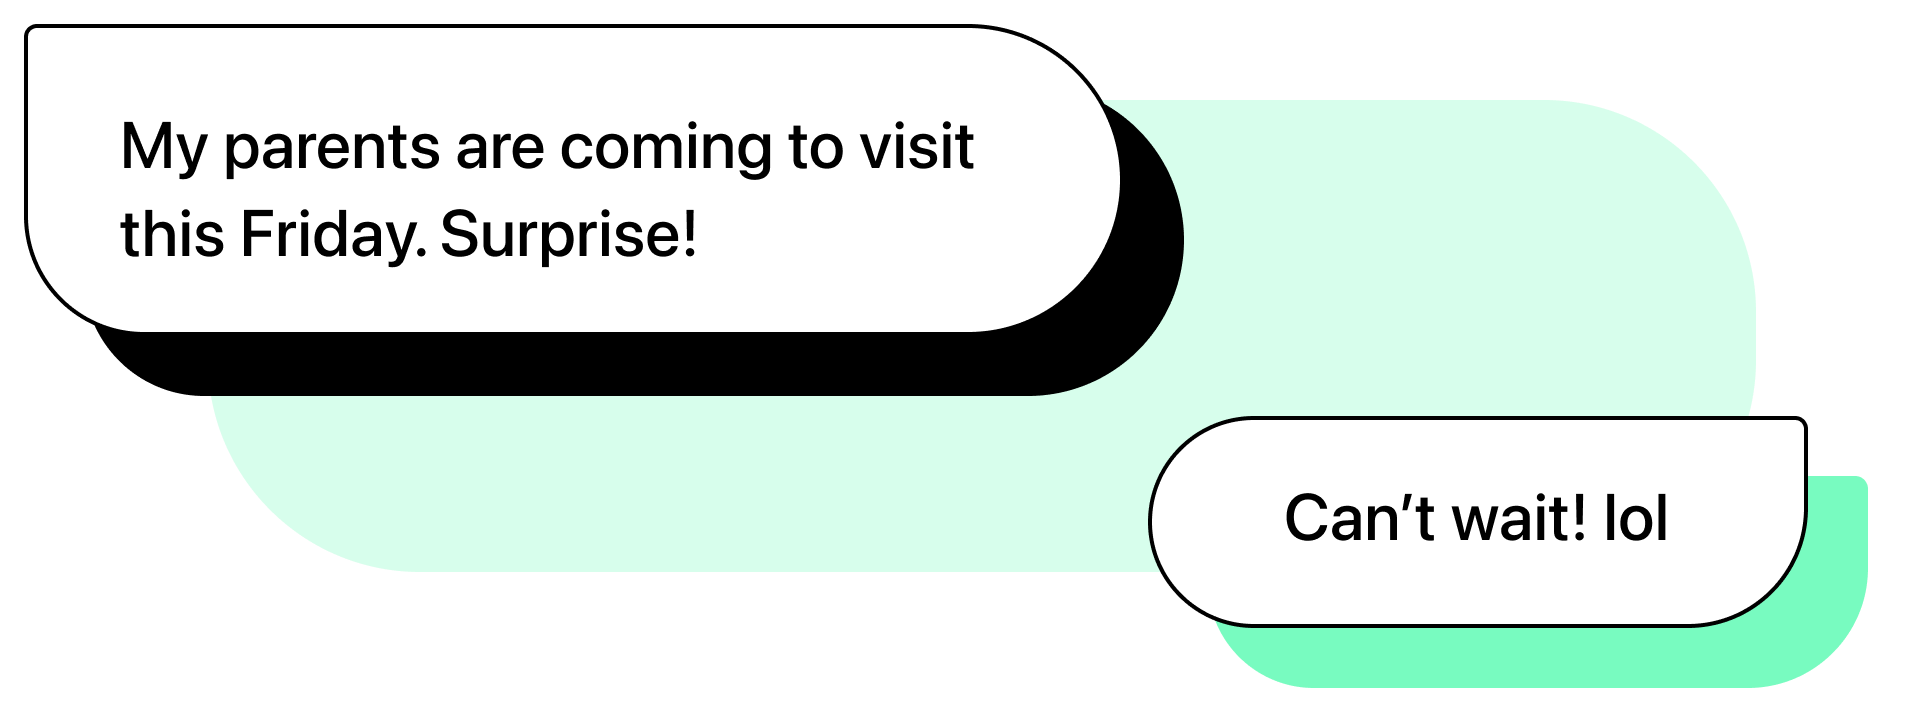 Two chat bubbles graphics. First message: "My parents are coming to visit this Friday. Surprise!". Second message: "Can't wait! lol"